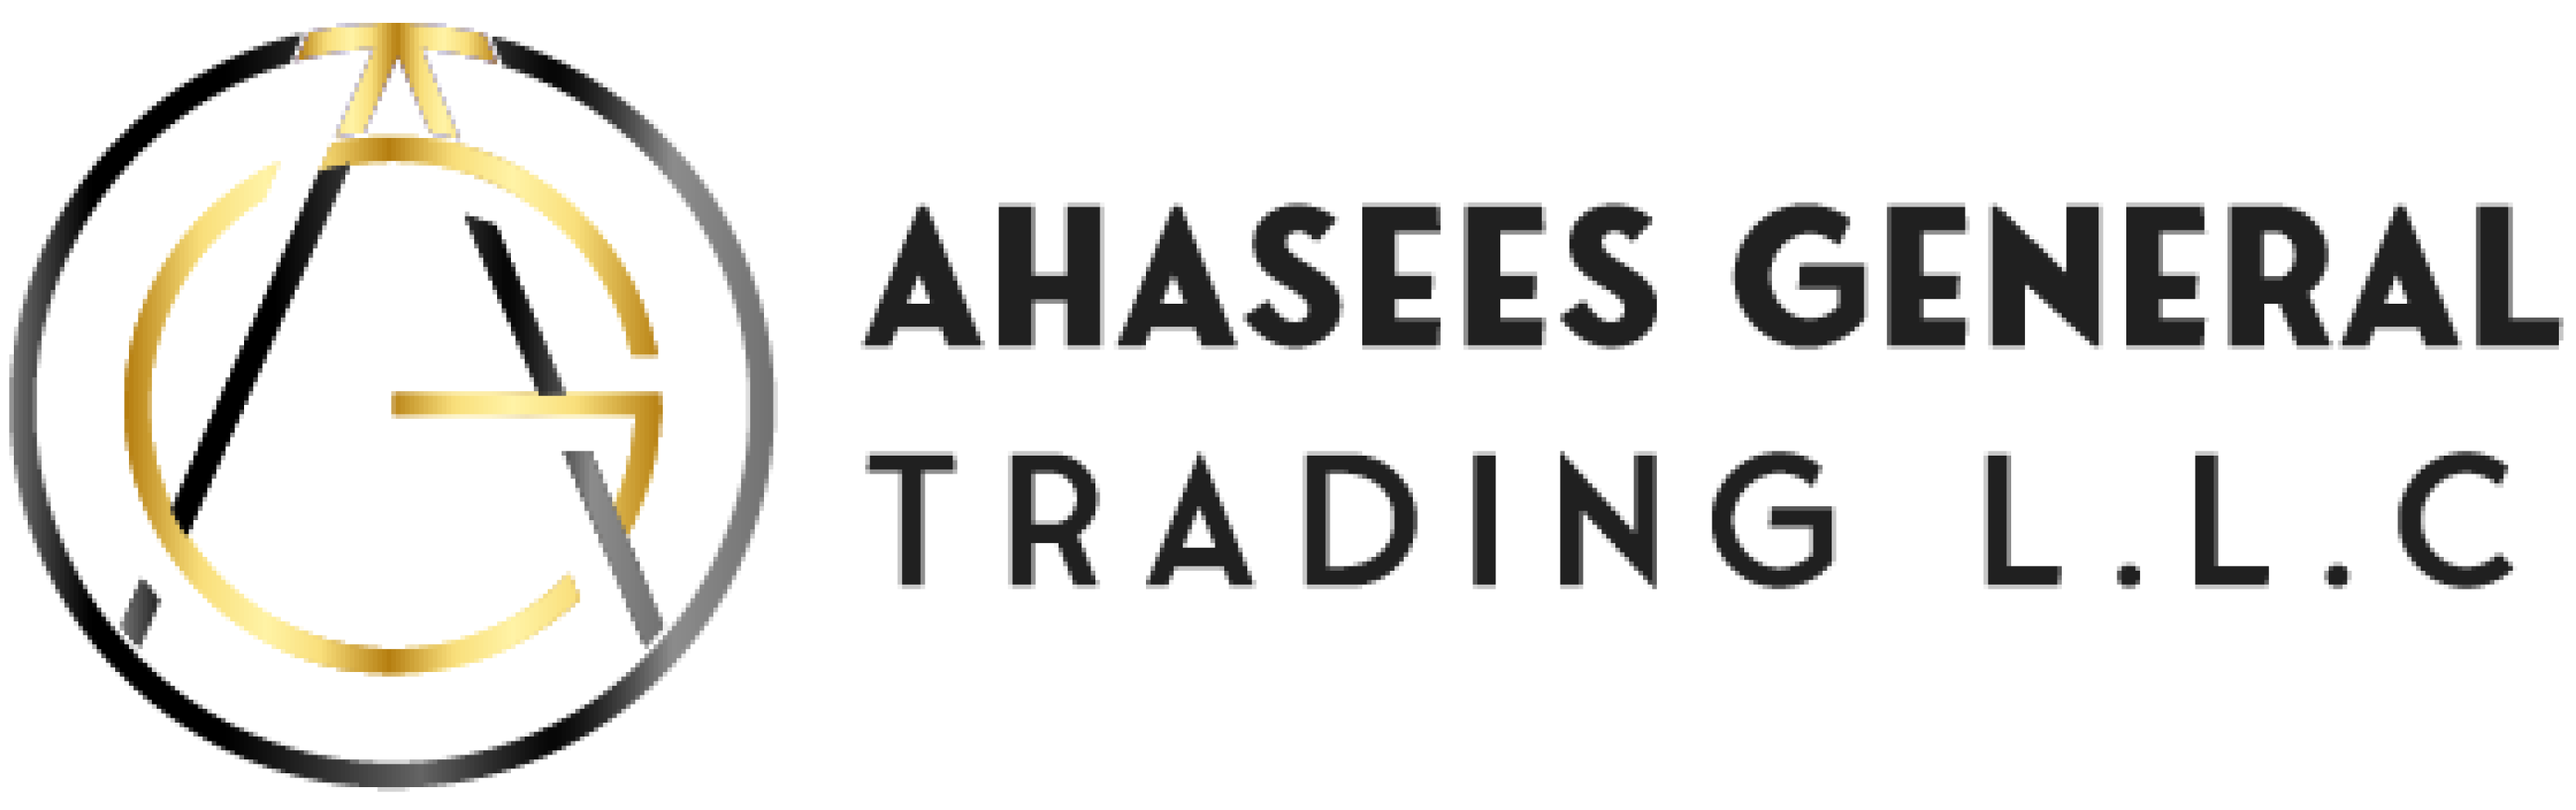 Ahasees Trading